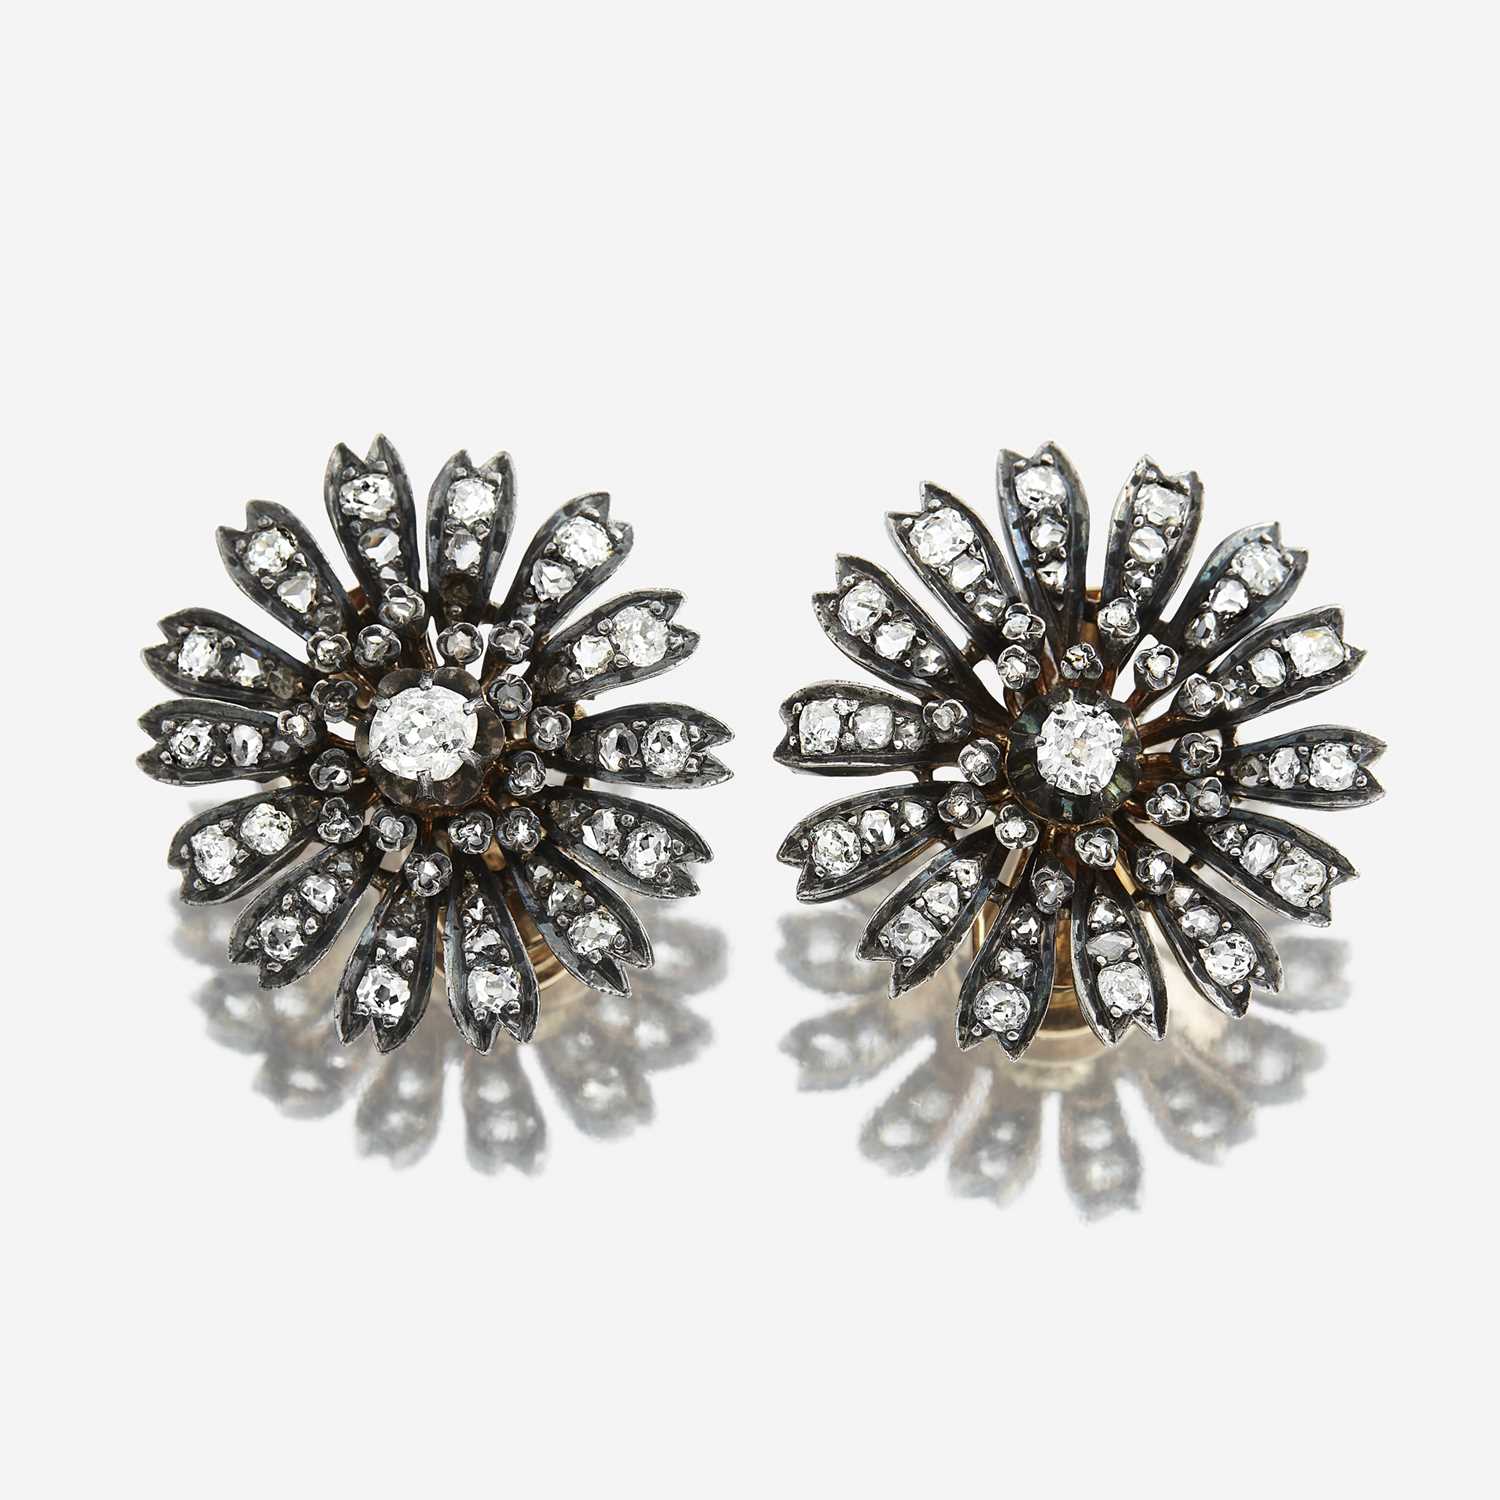 Lot 8 - A pair of antique diamond earrings